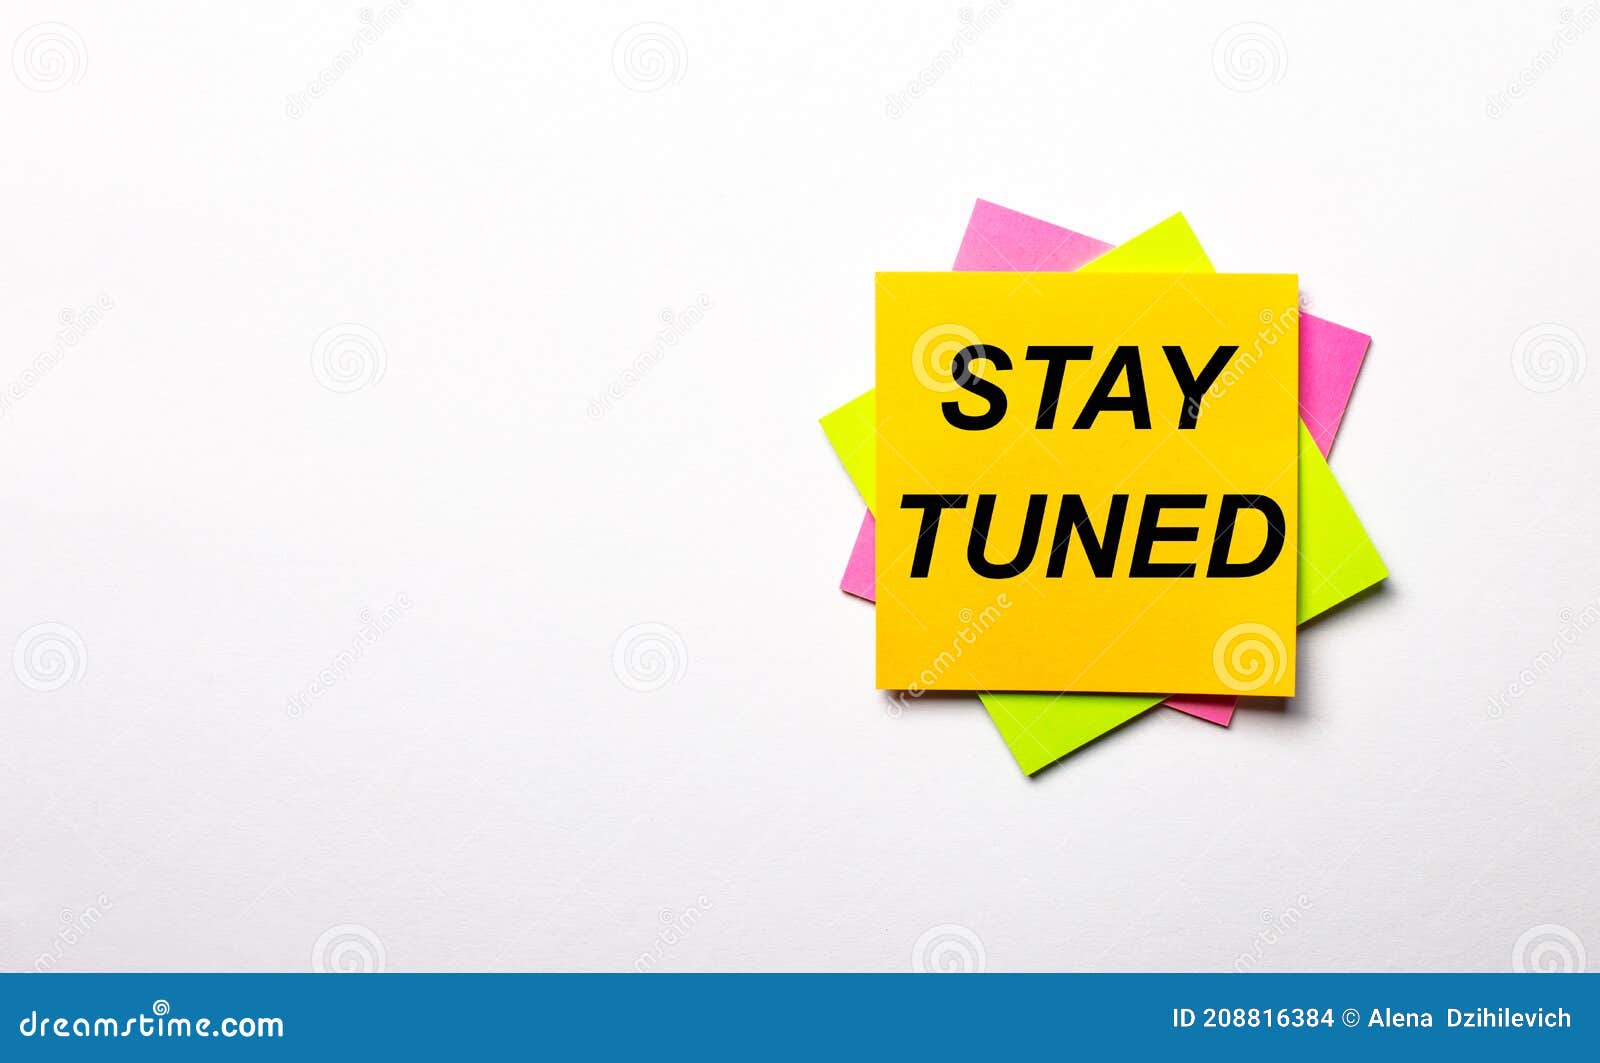 on a light background - bright multicolored stickers with the text stay tuned. copy space